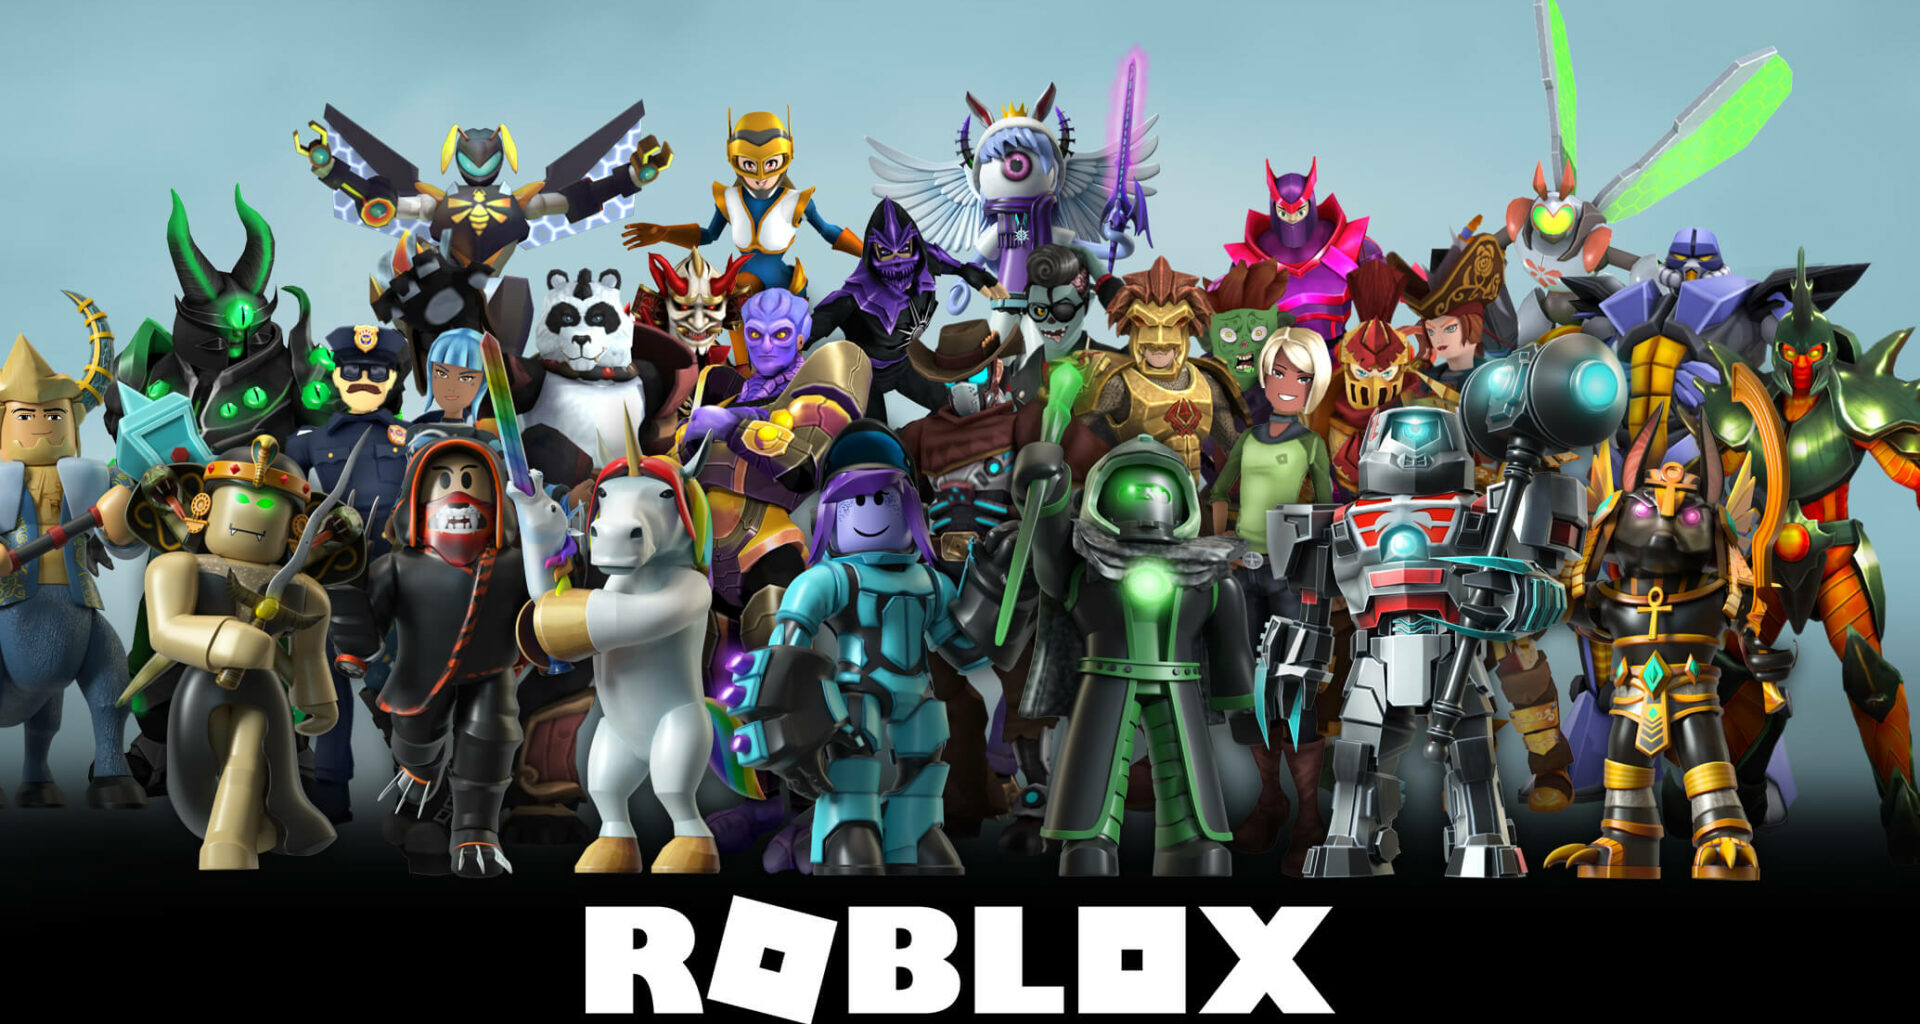 Download Roblox Apk For Free If You Can T Get Minecraft Apk Legally - download robloxapk for android apk s